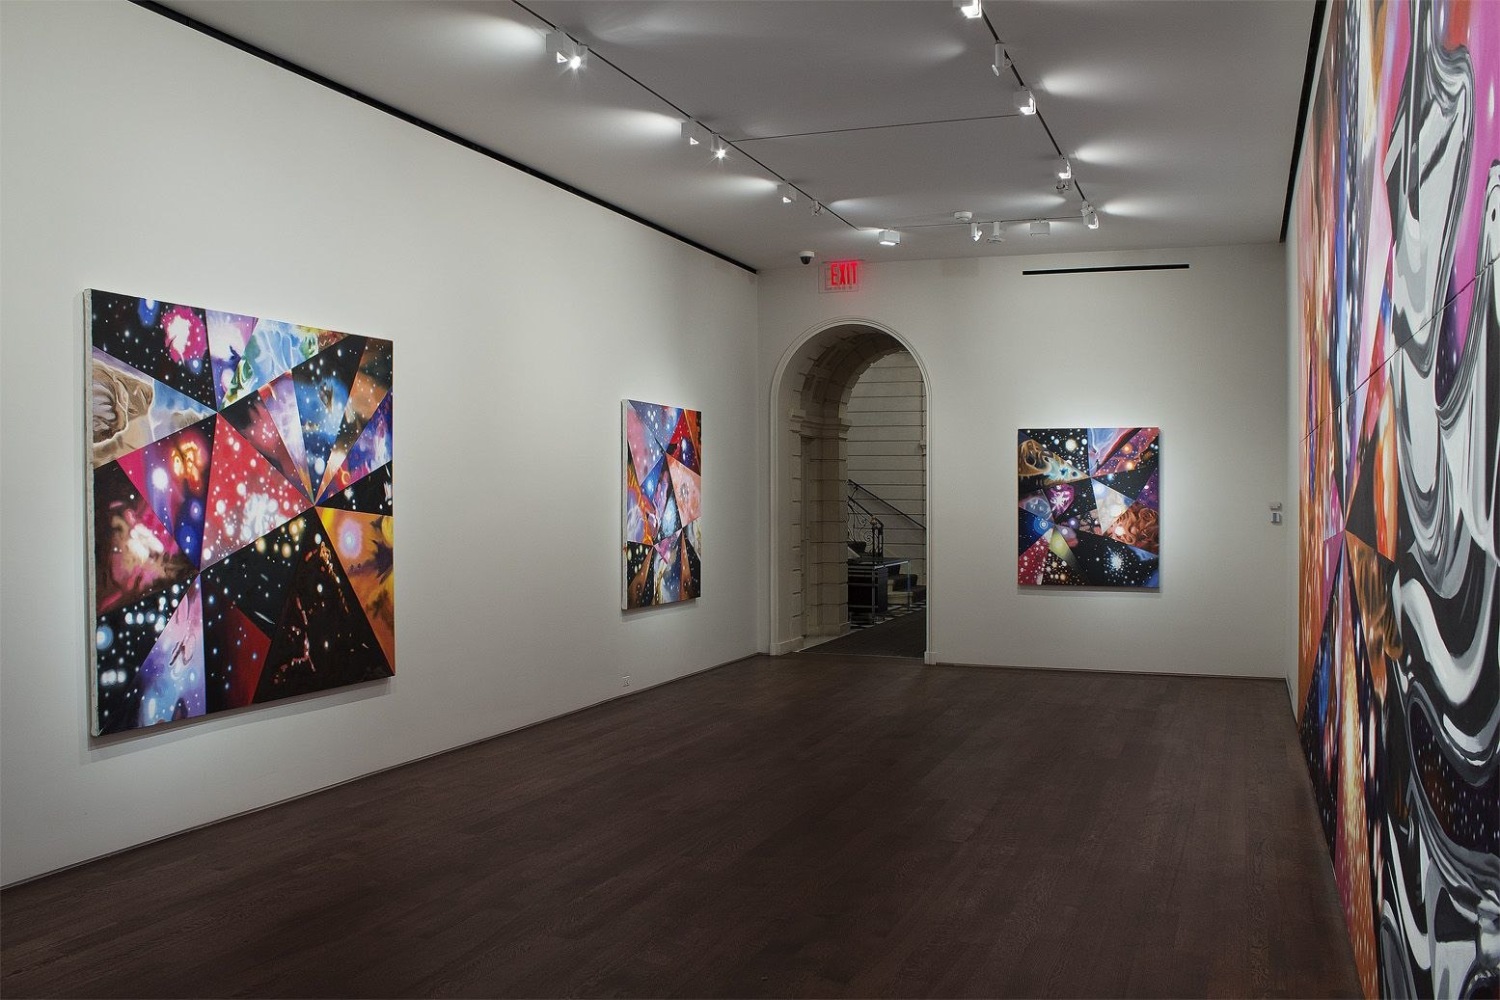 Installation view of James Rosenquist, Multiverse You Are, I Am, September 10 - October 13, 2012.